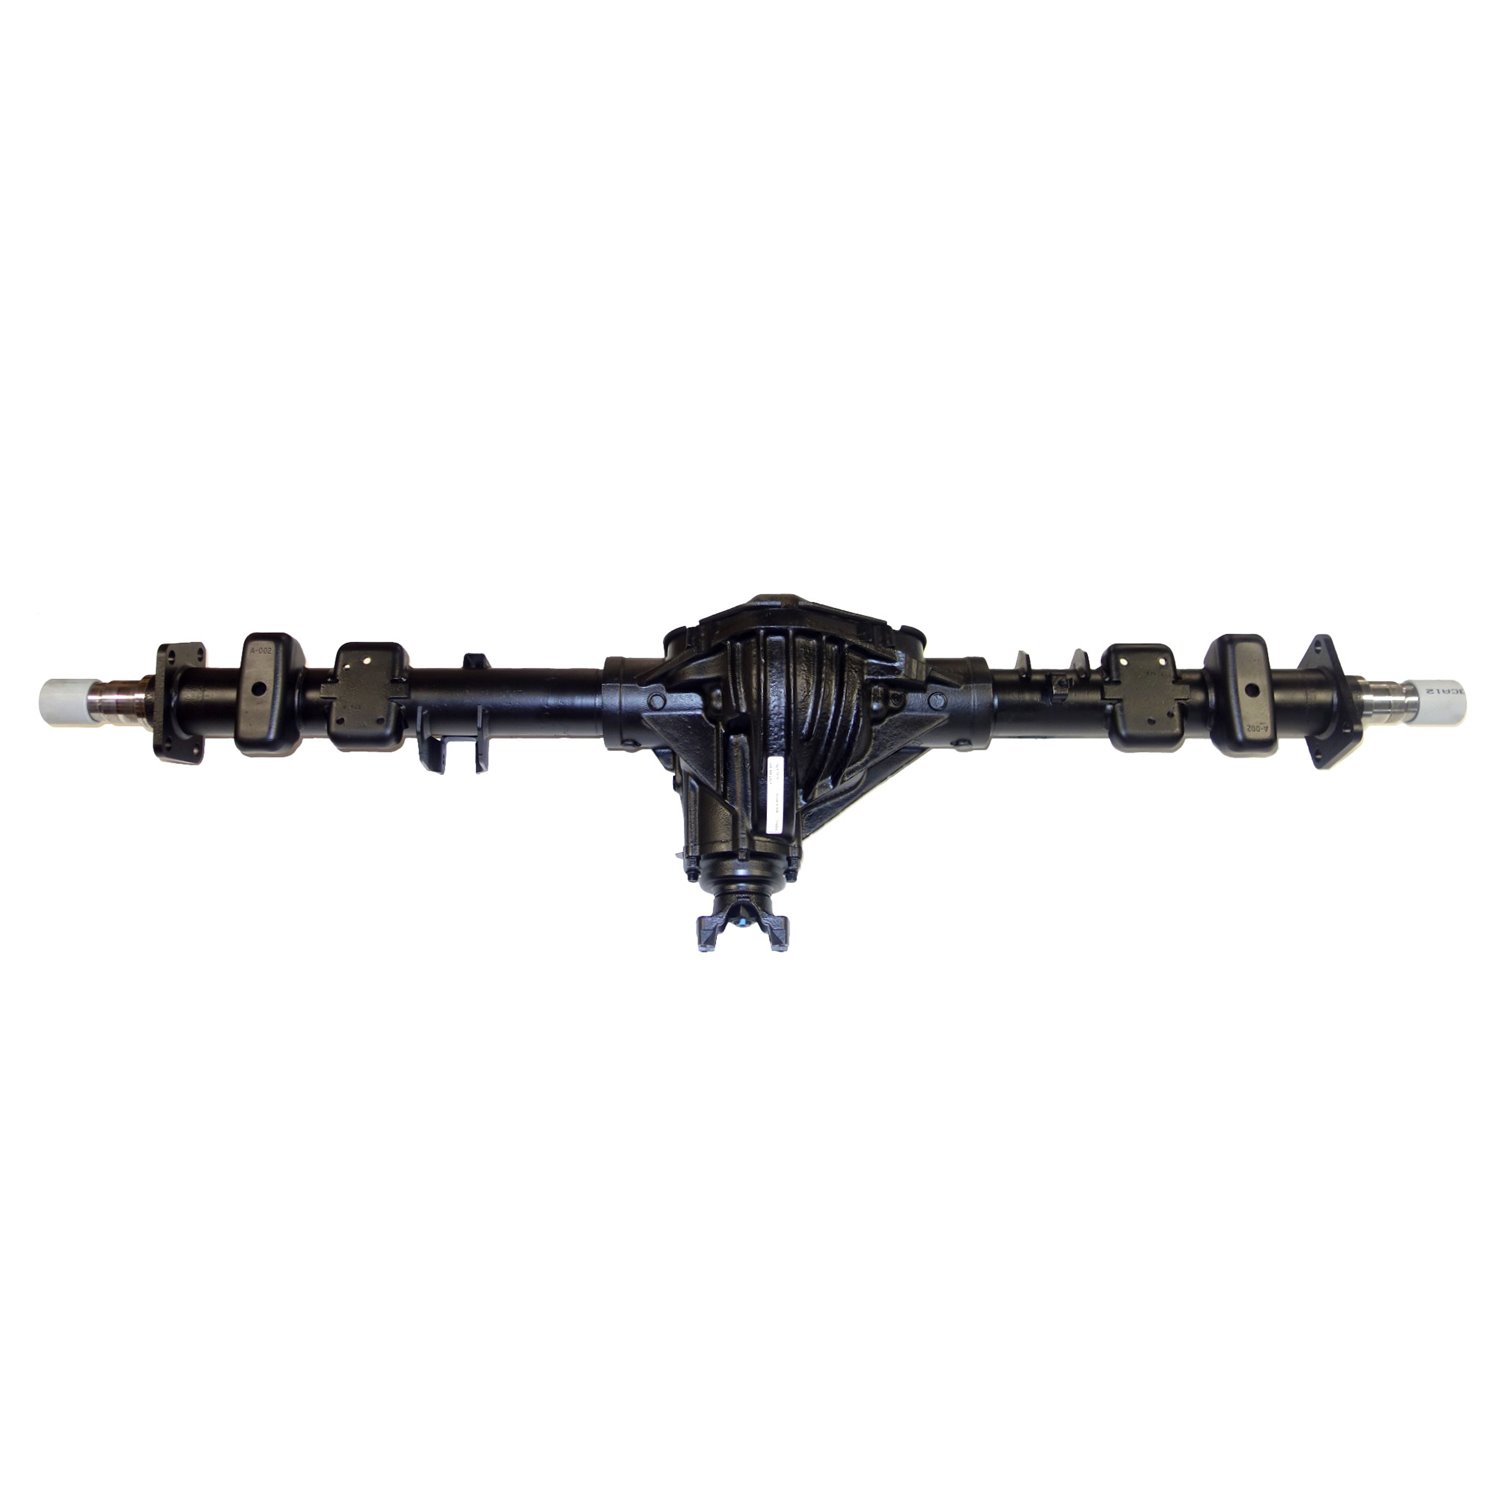 Remanufactured Complete Axle Assy for GM 14 Bolt Truck 90-00 GM 3500 4.11 , SRW, Pickup